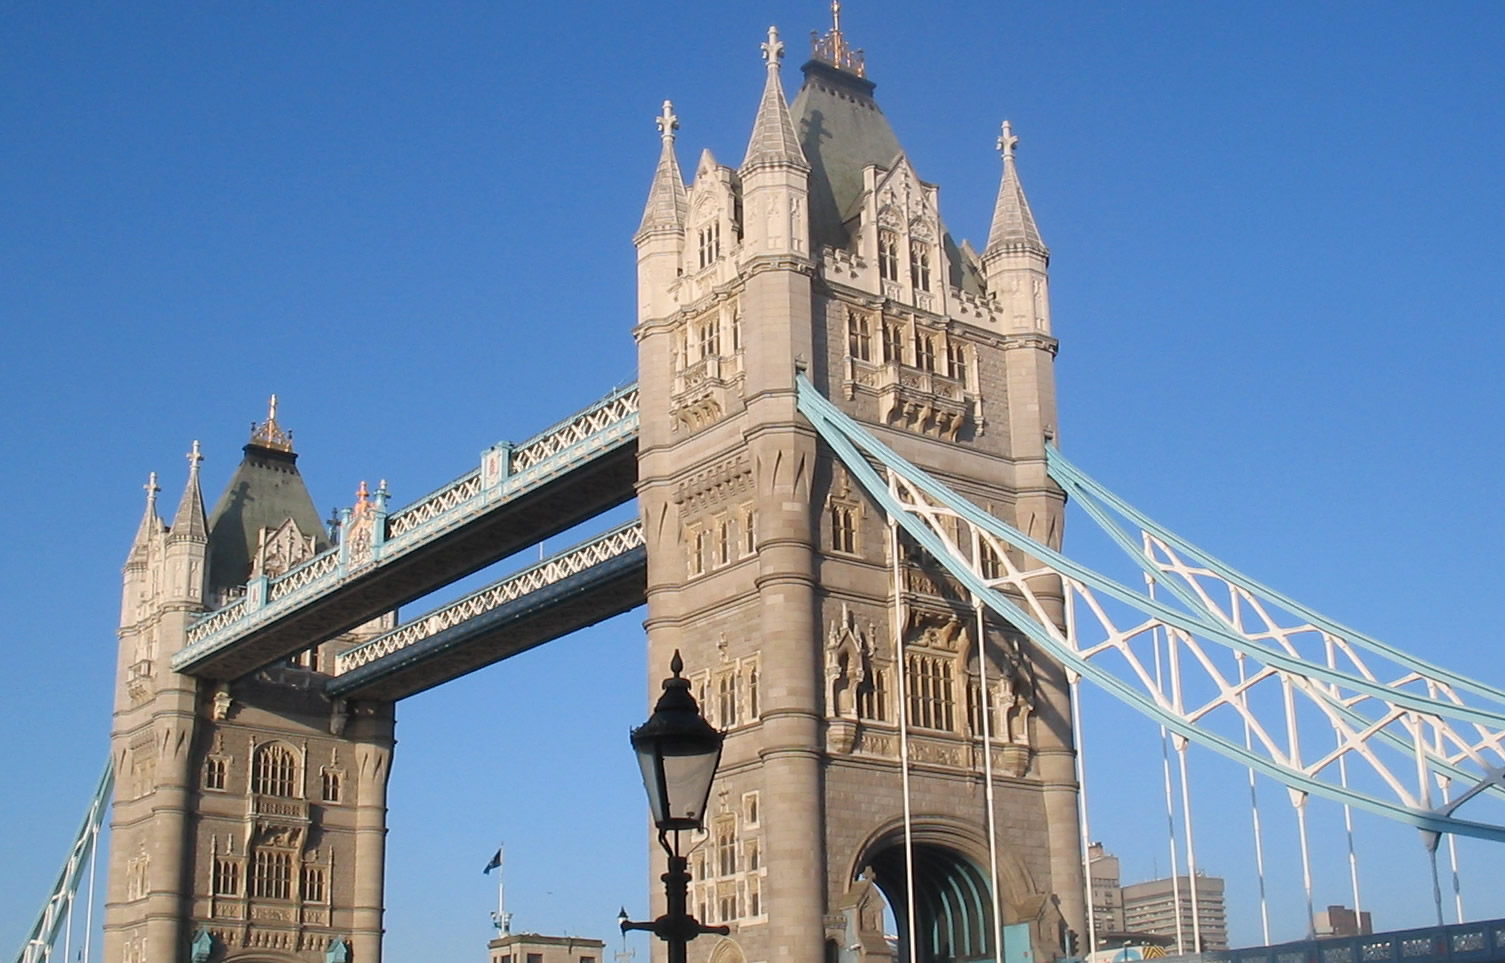 Tower Bridge 2006 by Sanborn Consulting